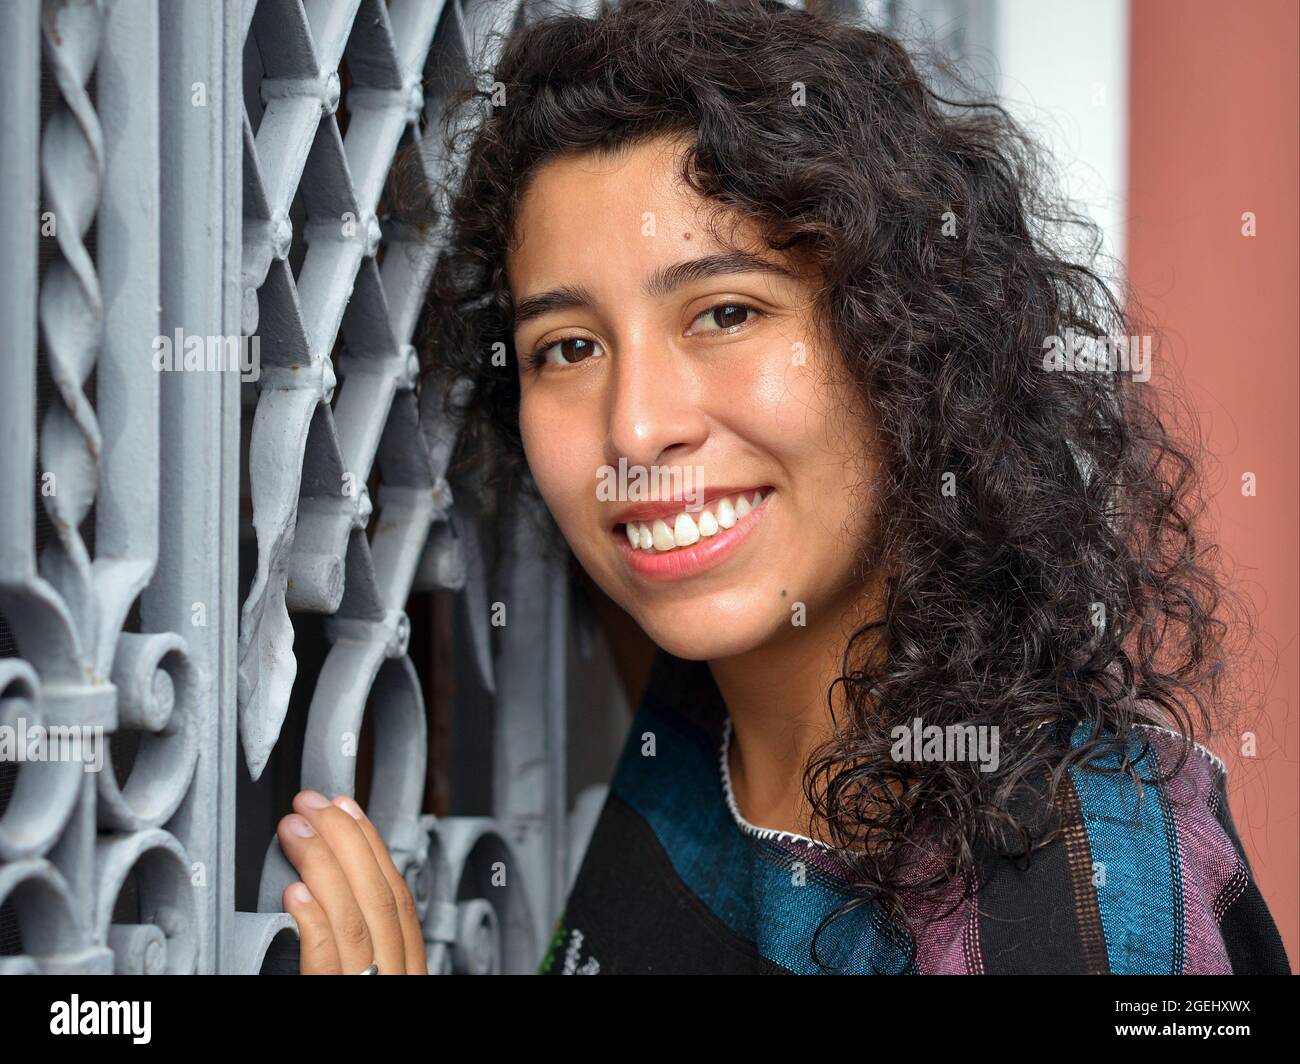 Beautiful positive emotional young Mexican Latina Hispanic woman with long black curls poses in front of a white security steel window grill. Stock Photo